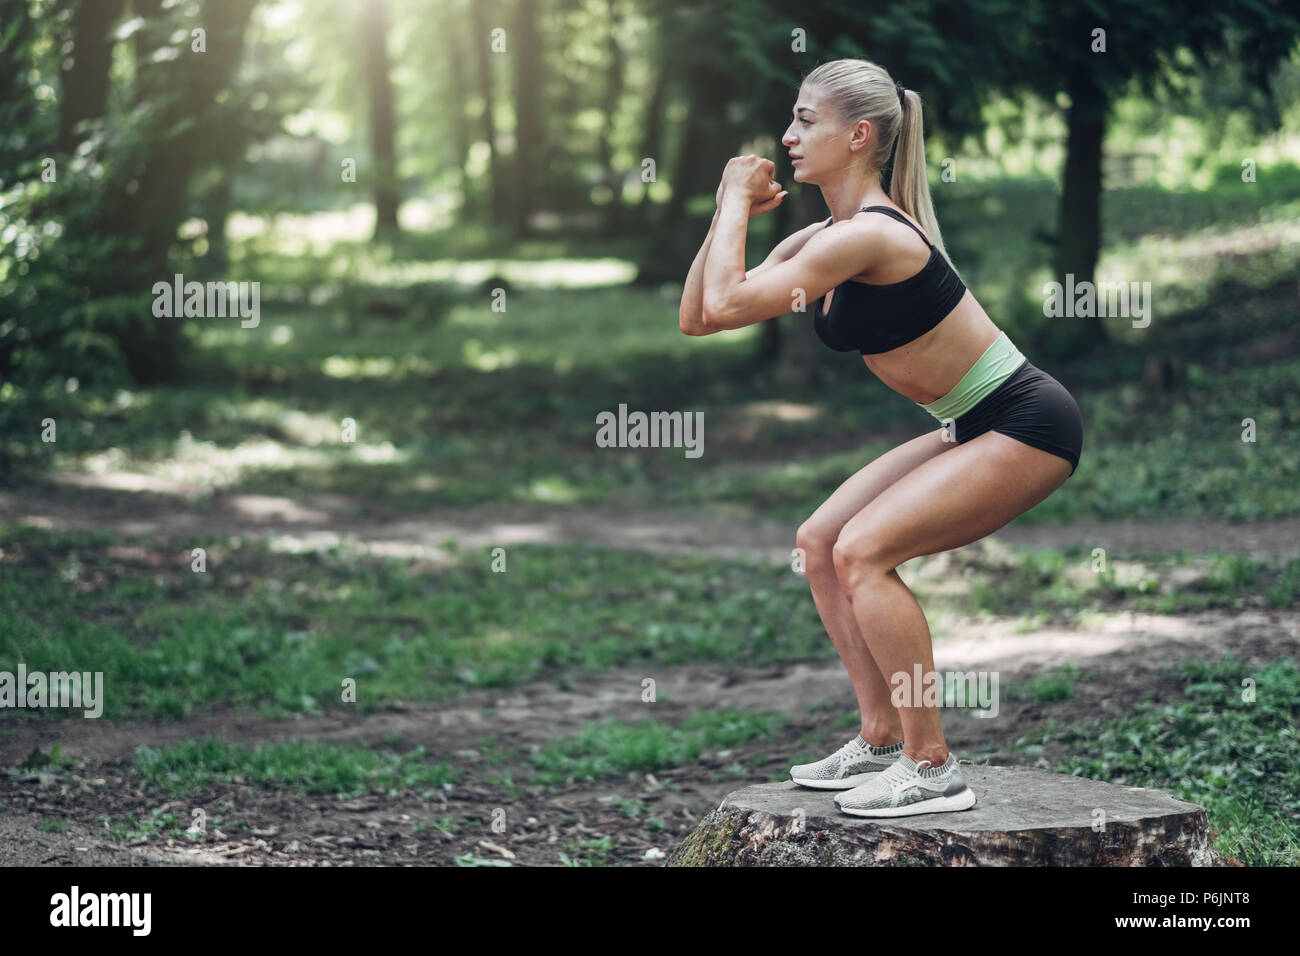 Fitness Woman Doing Training Workout Outdoor in Summer Morning Park. Concept Sport Healthy Lifestyle. Stock Photo